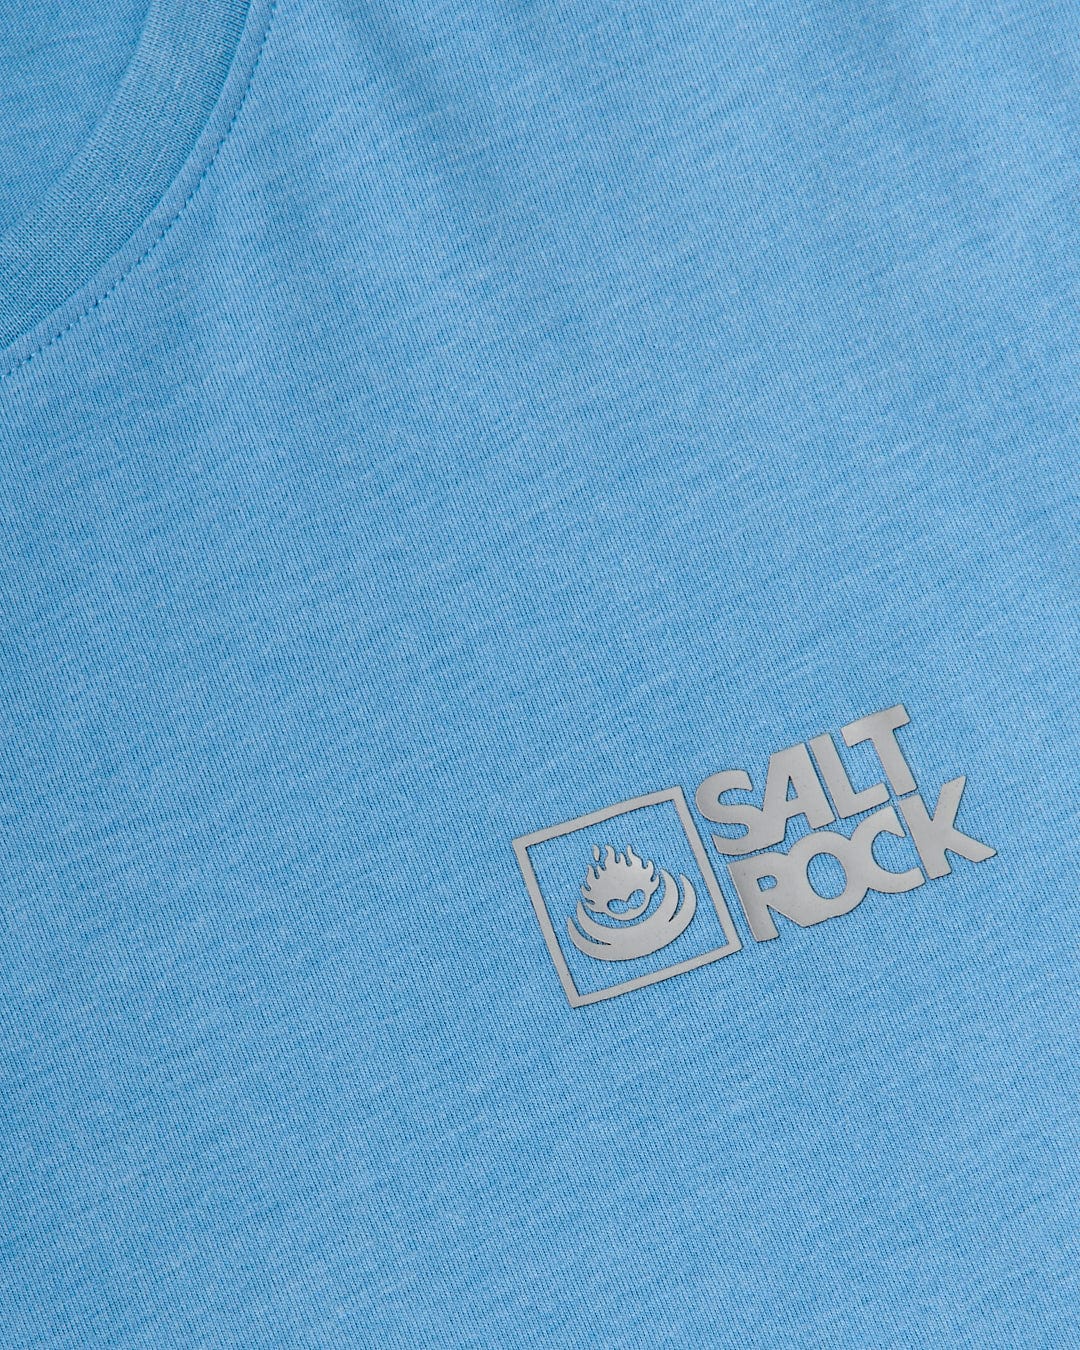 An everyday essential, Corp - Men's Short Sleeve T-shirt - Light Blue with the Saltrock logo on it.